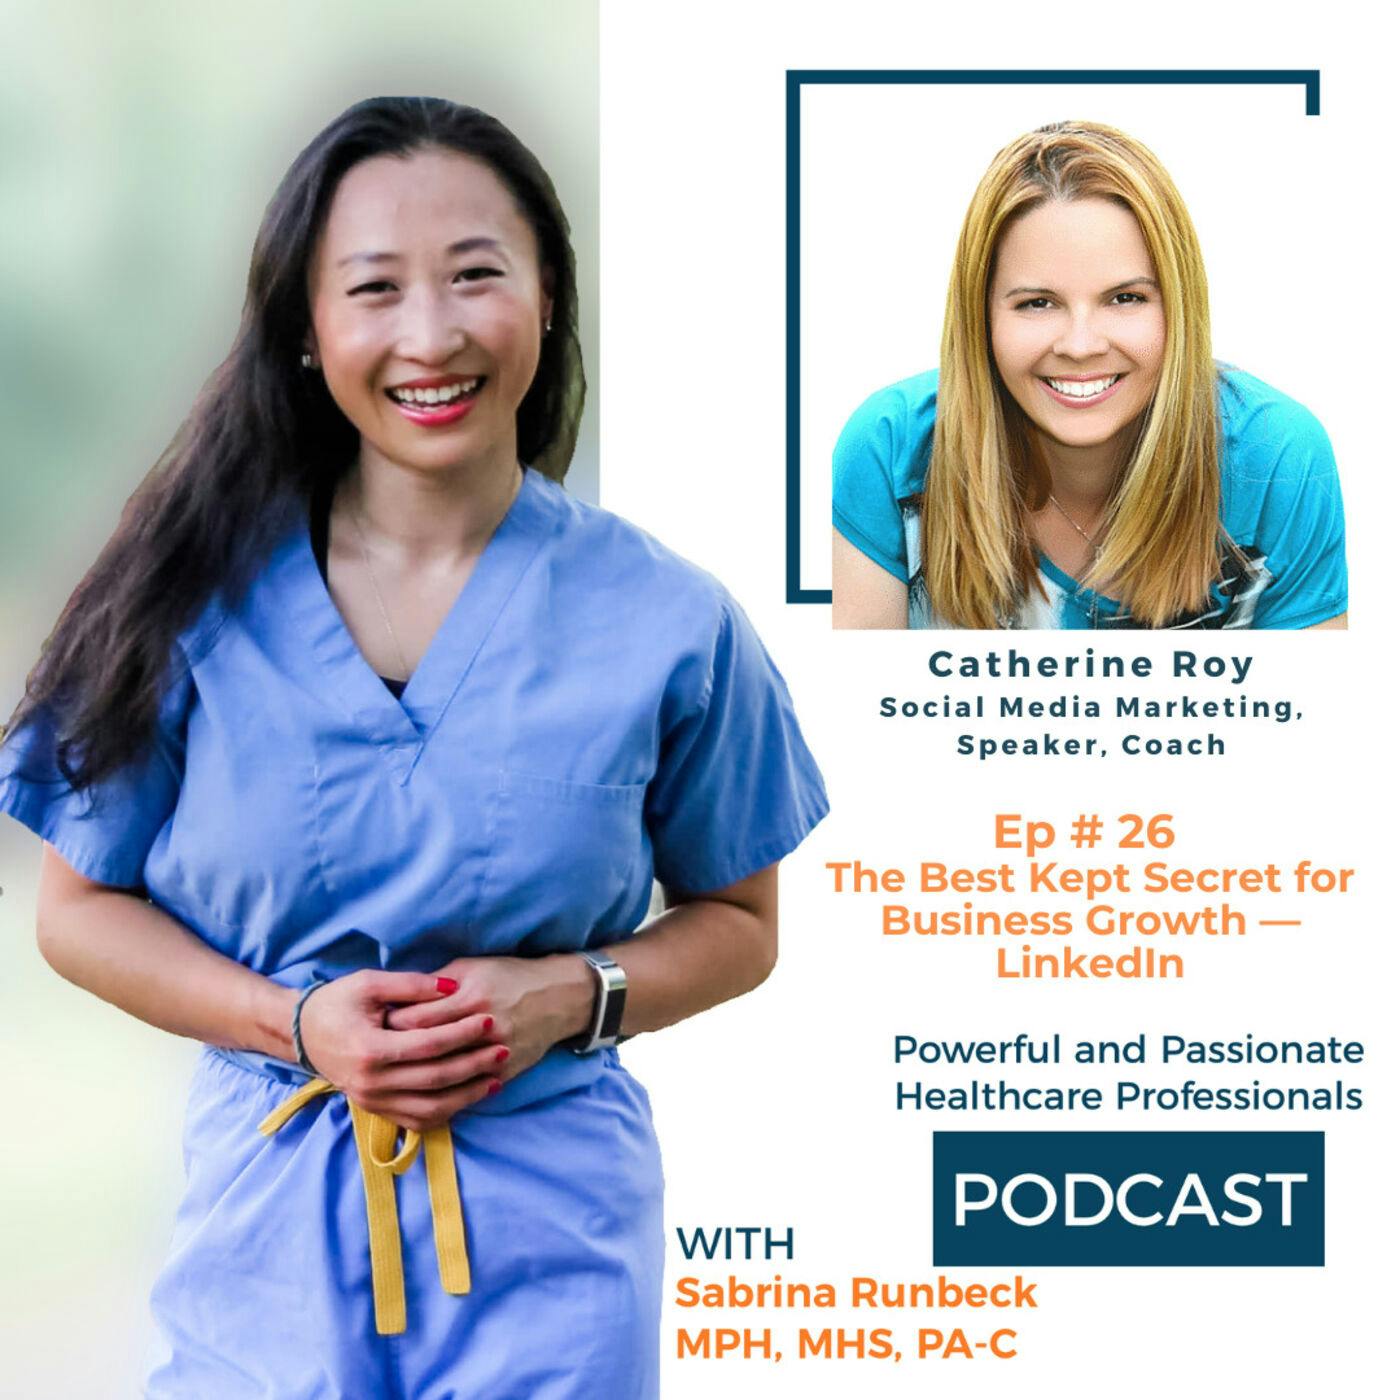 Ep 26 – The Best Kept Secret for Business Growth — LinkedIn with Catherine Roy